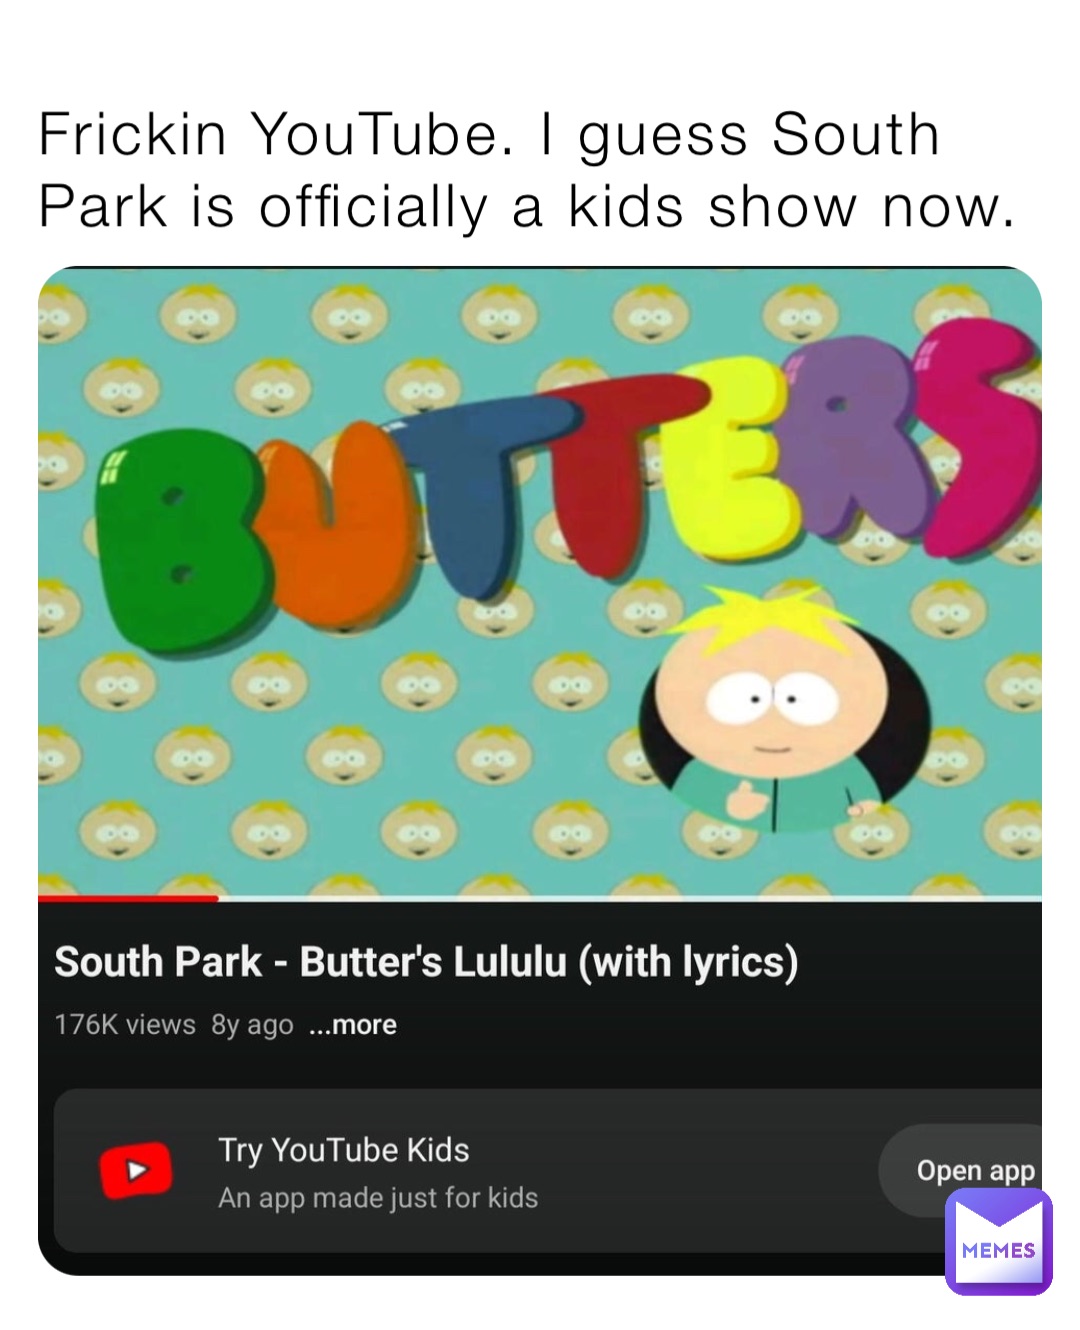 Frickin YouTube. I guess South Park is officially a kids show now.